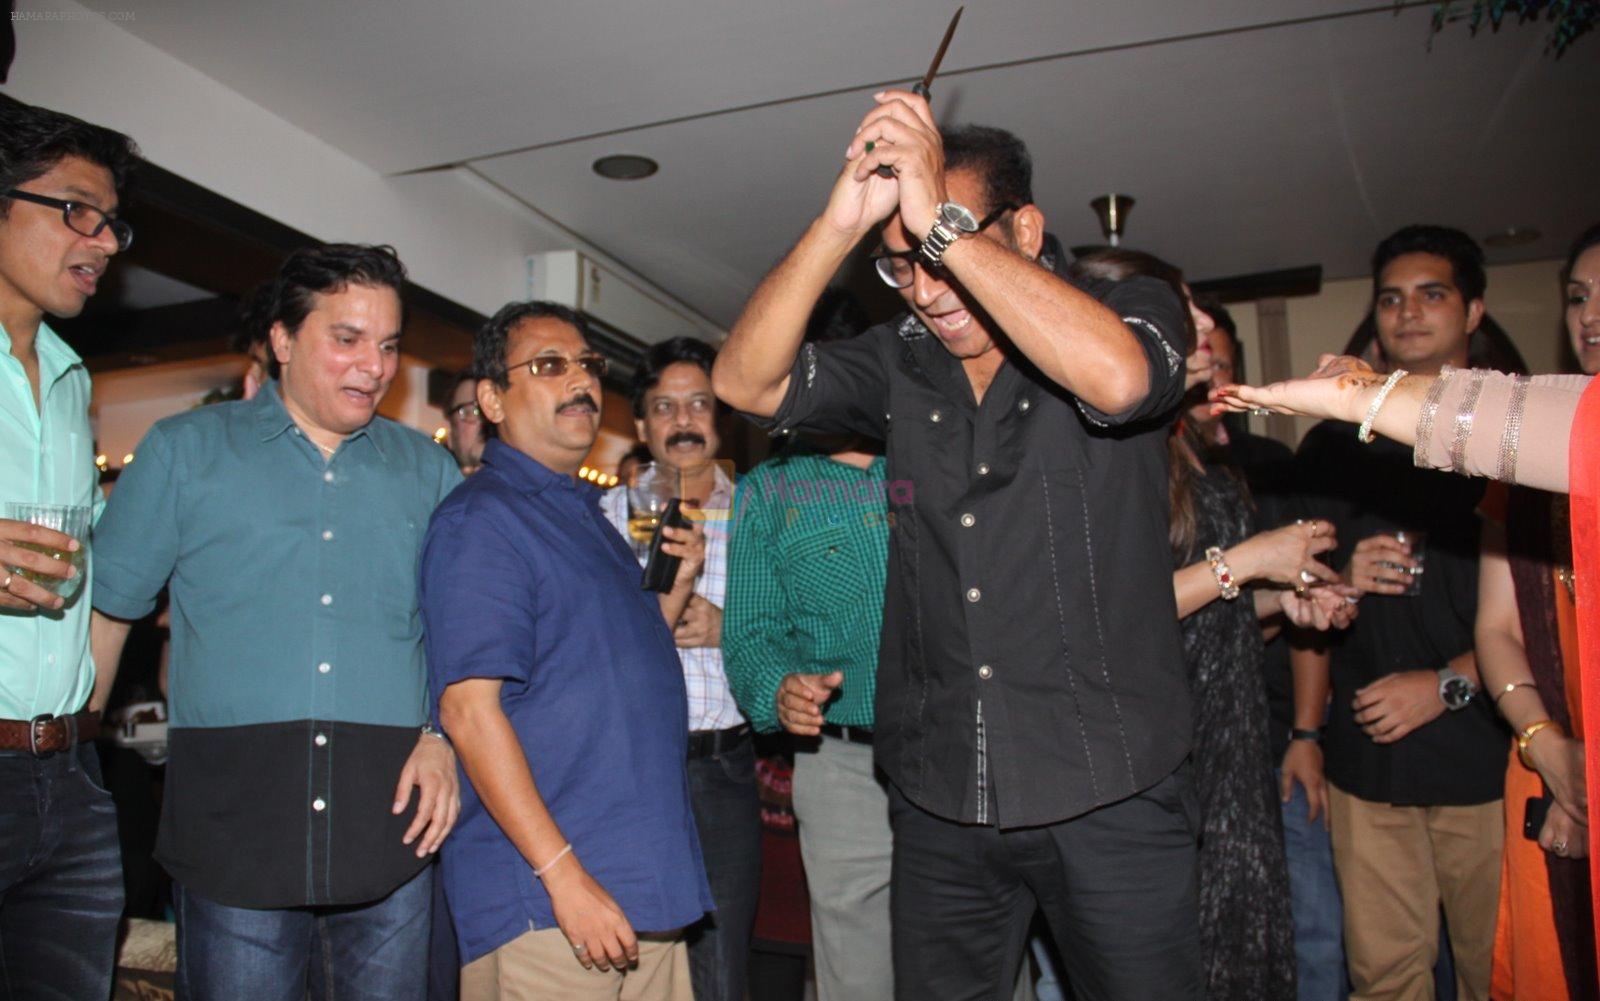 Cake Cutting at Abhijeet Bhattacharya's birthday party on 30th October 2013